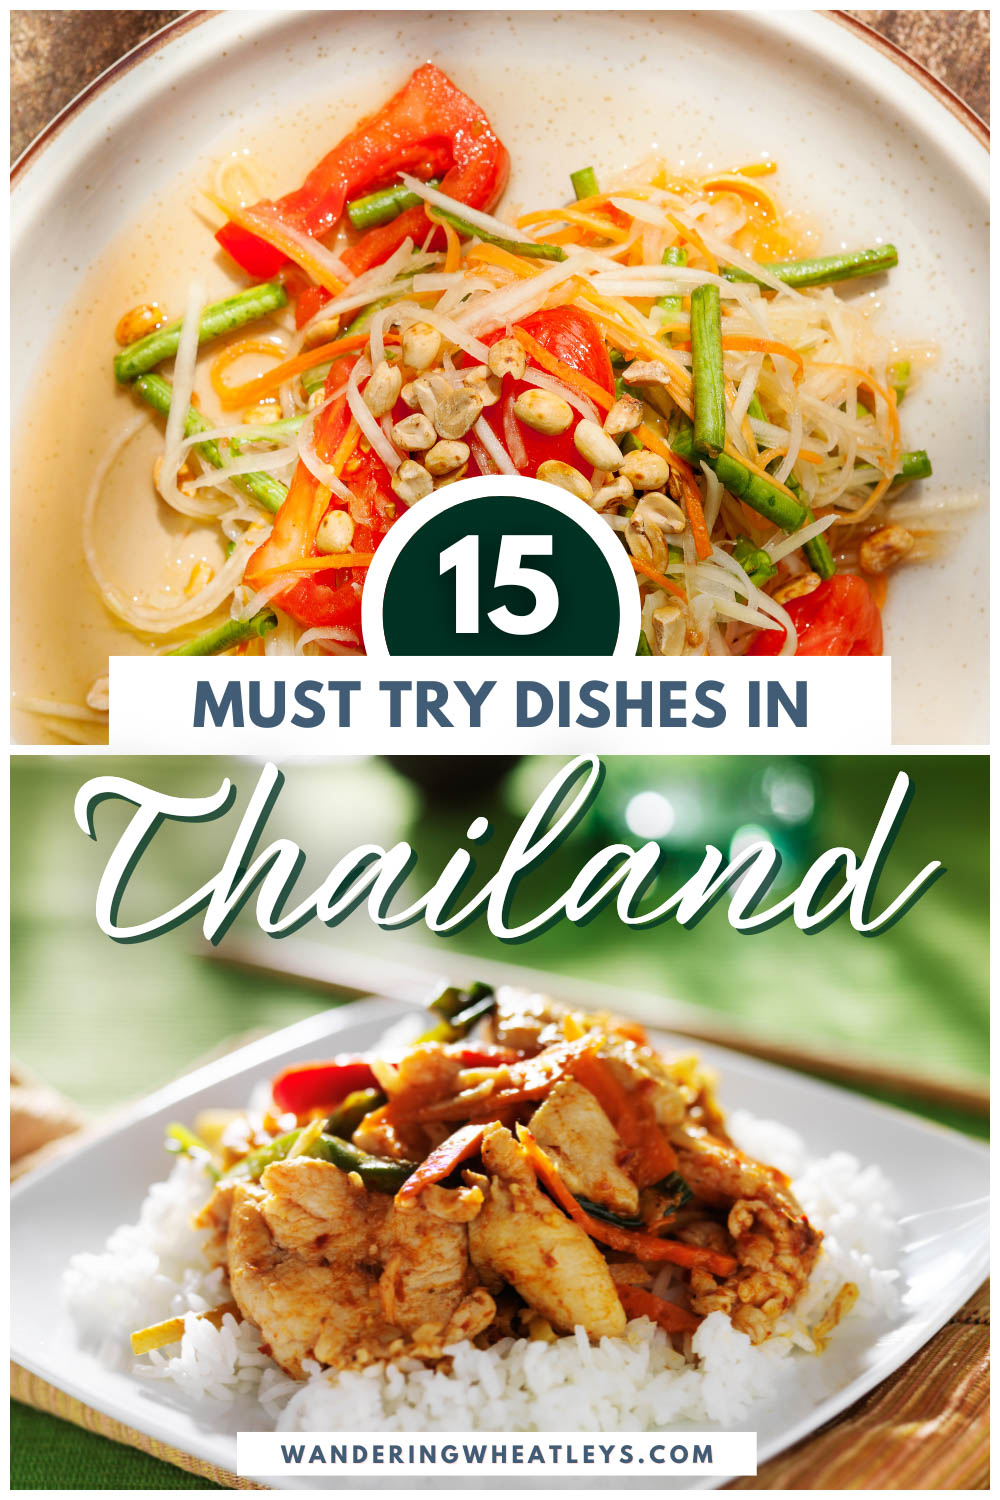 Best Thai Dishes to Try in Thailand